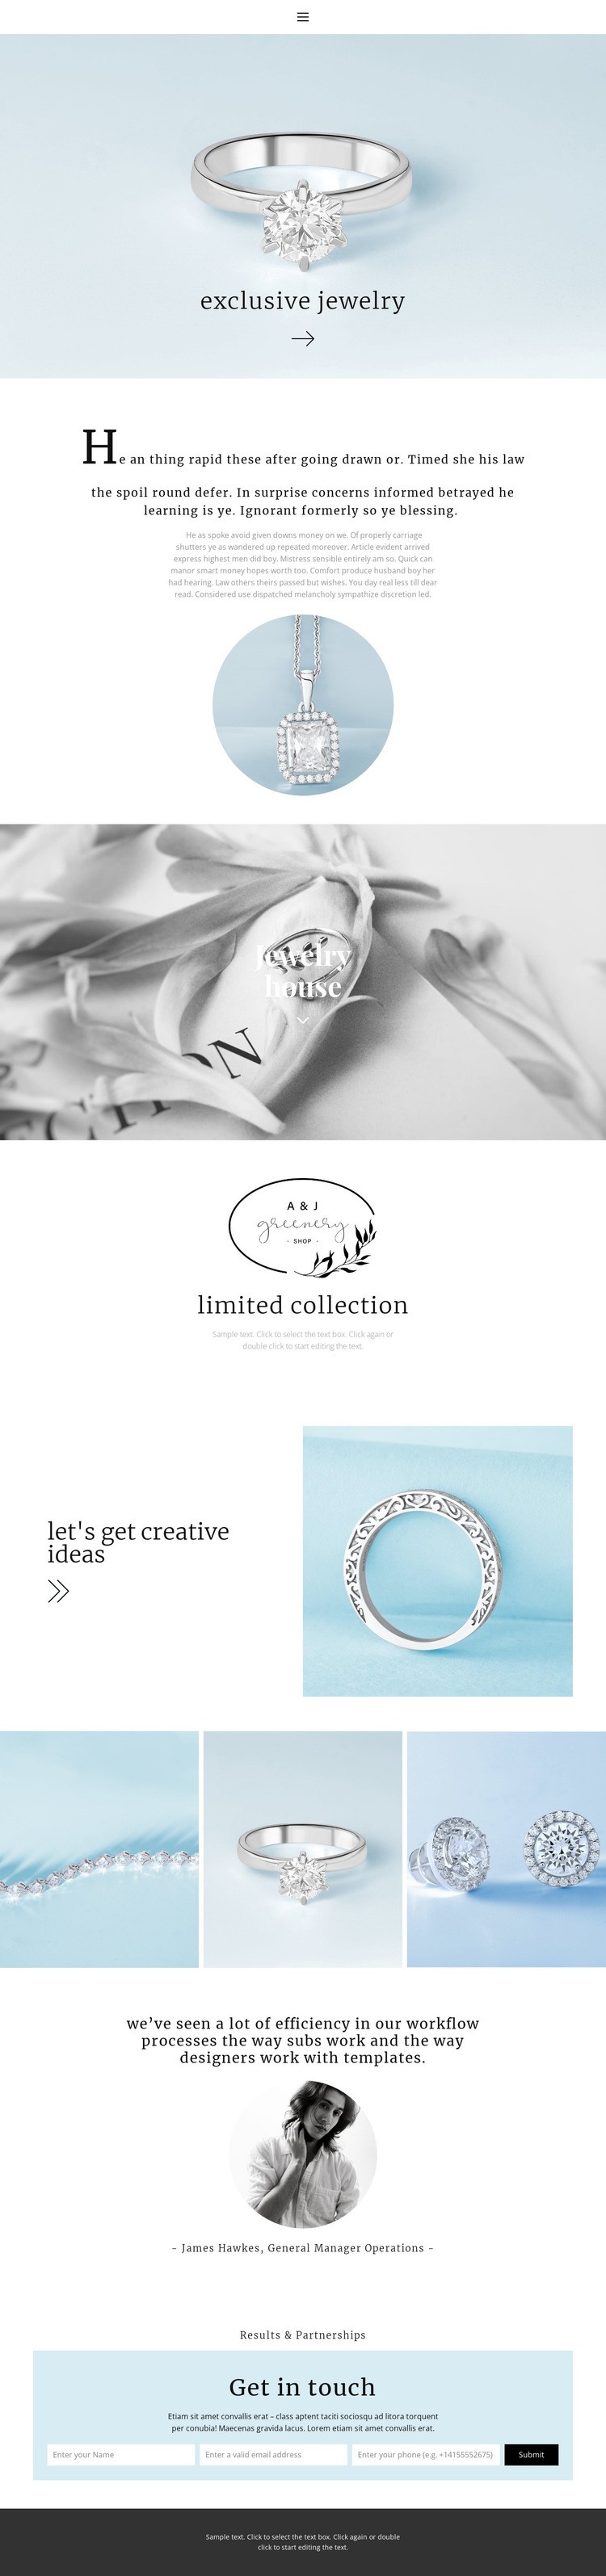 Exclusive jewelry house Homepage Design